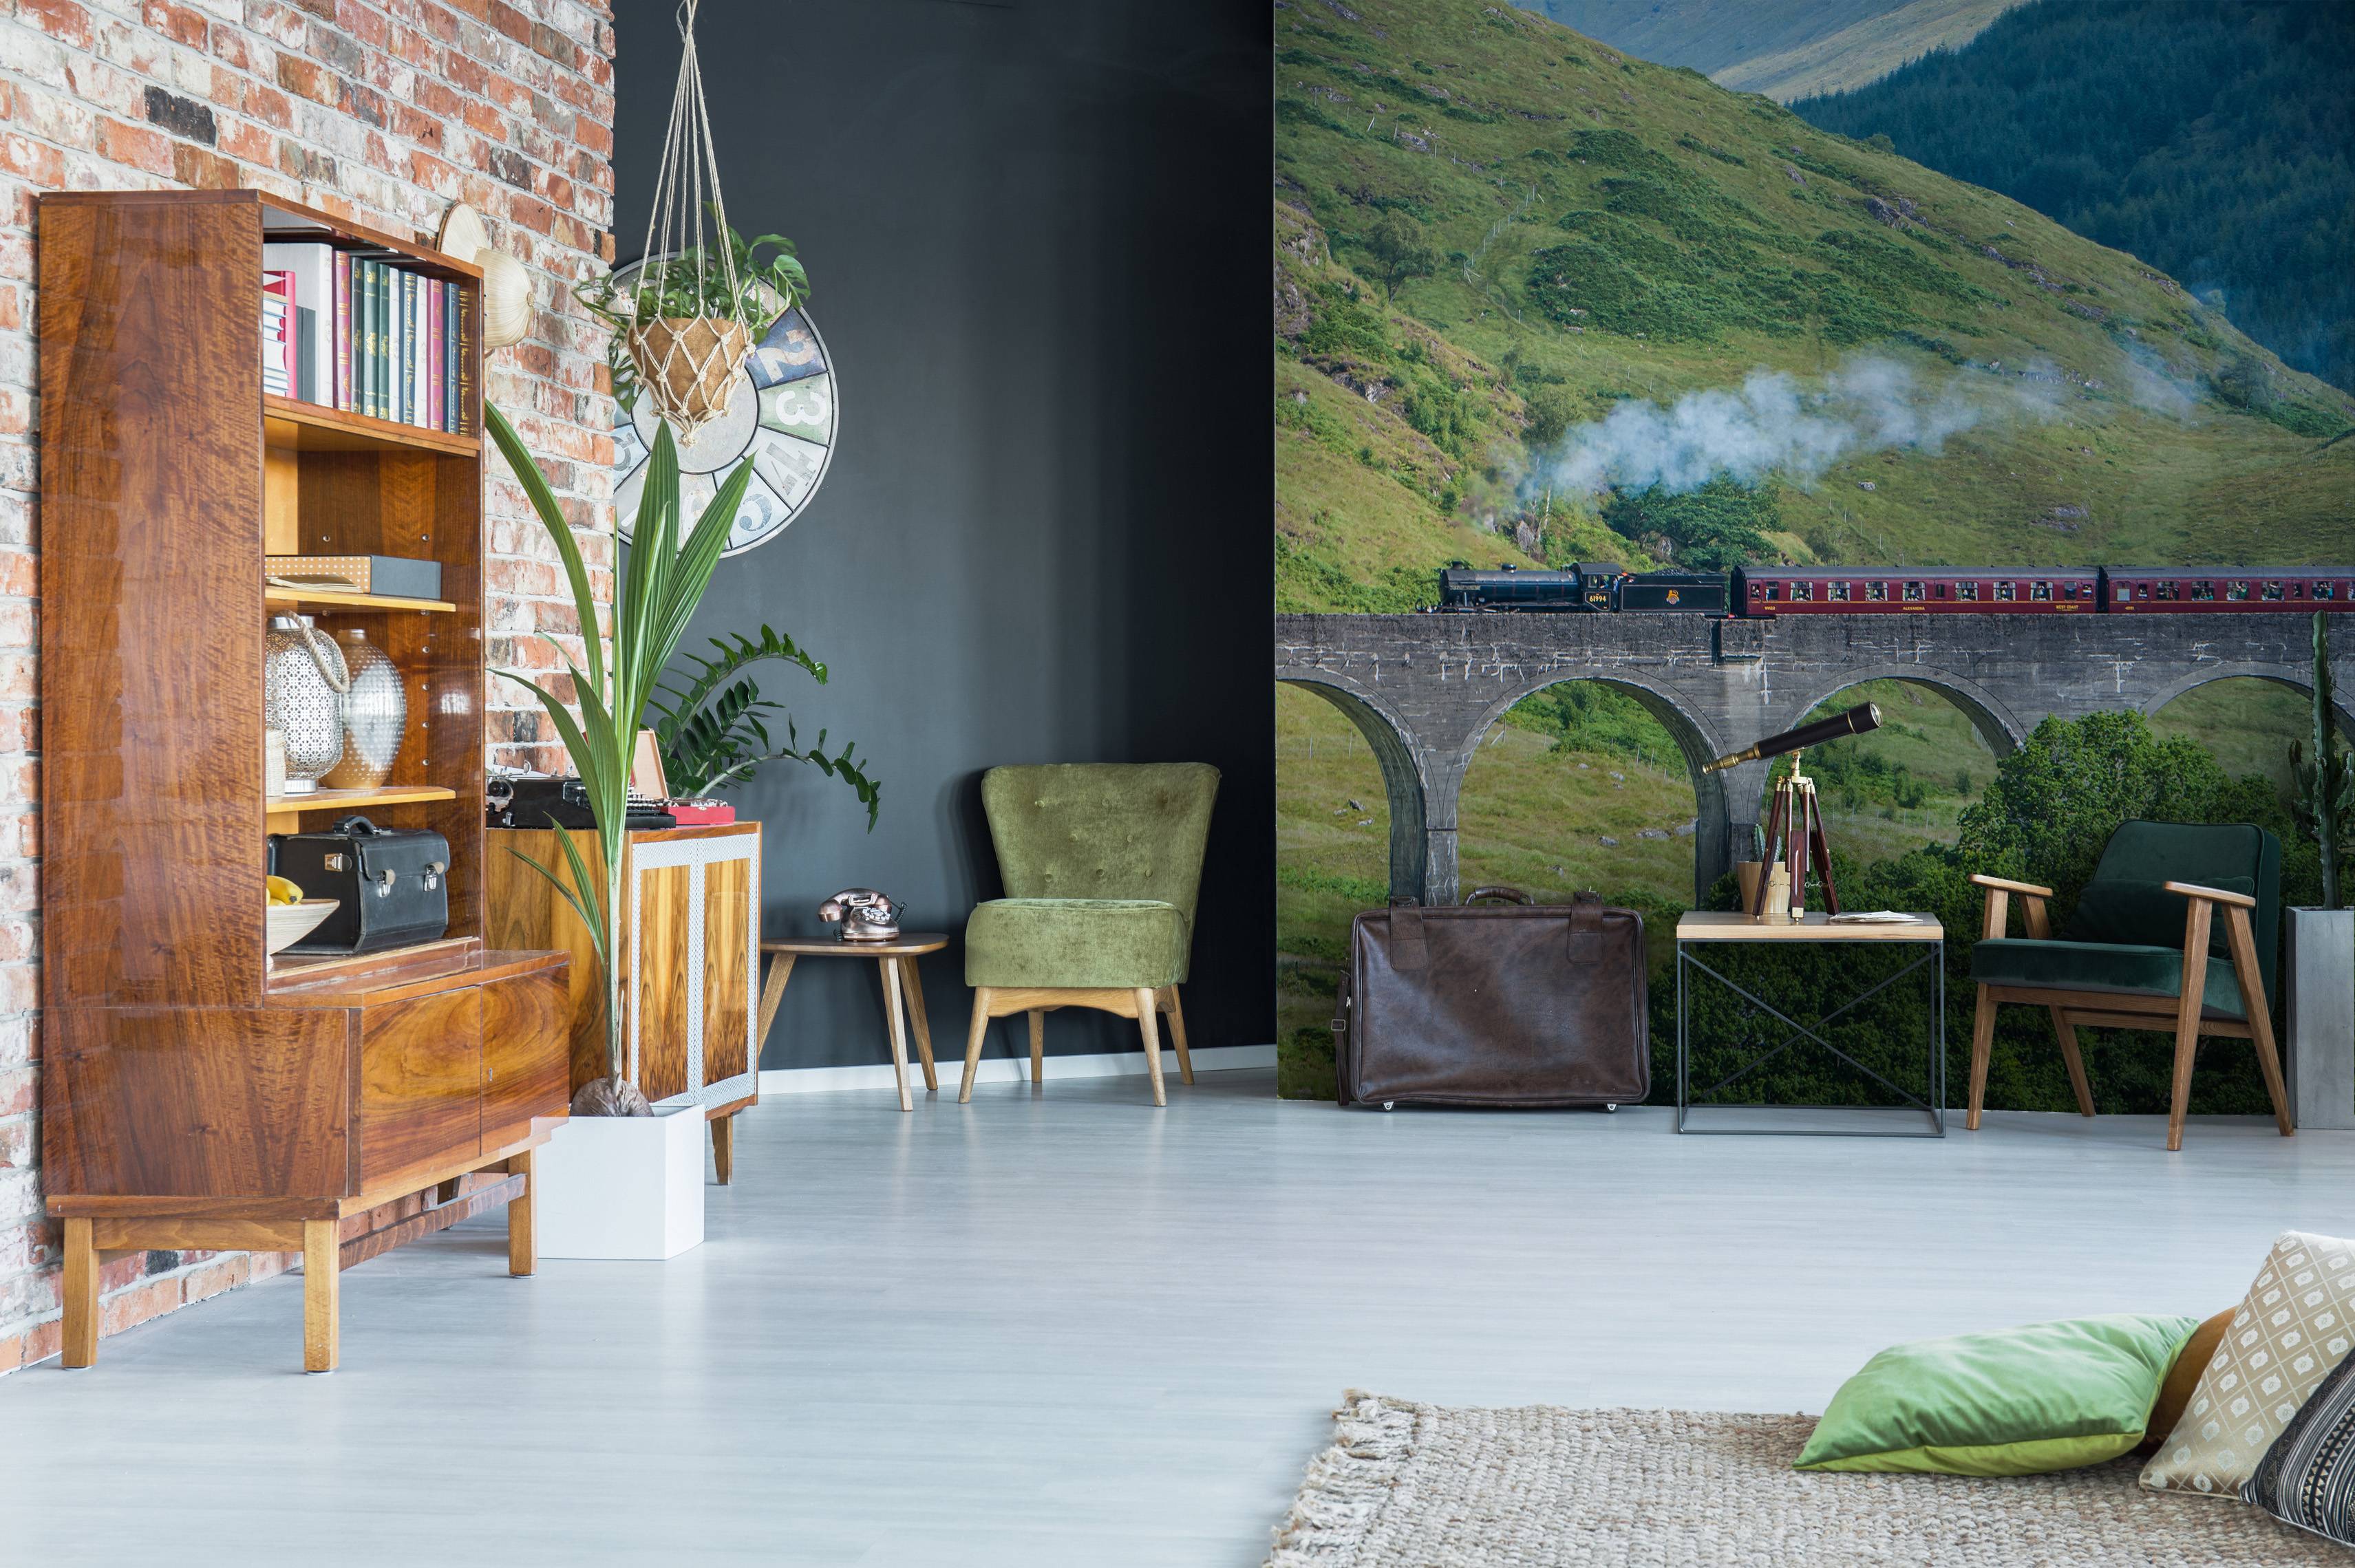 Train among the green hills • Living room - Architecture and buildings - Nature - Landscapes - Wall Murals